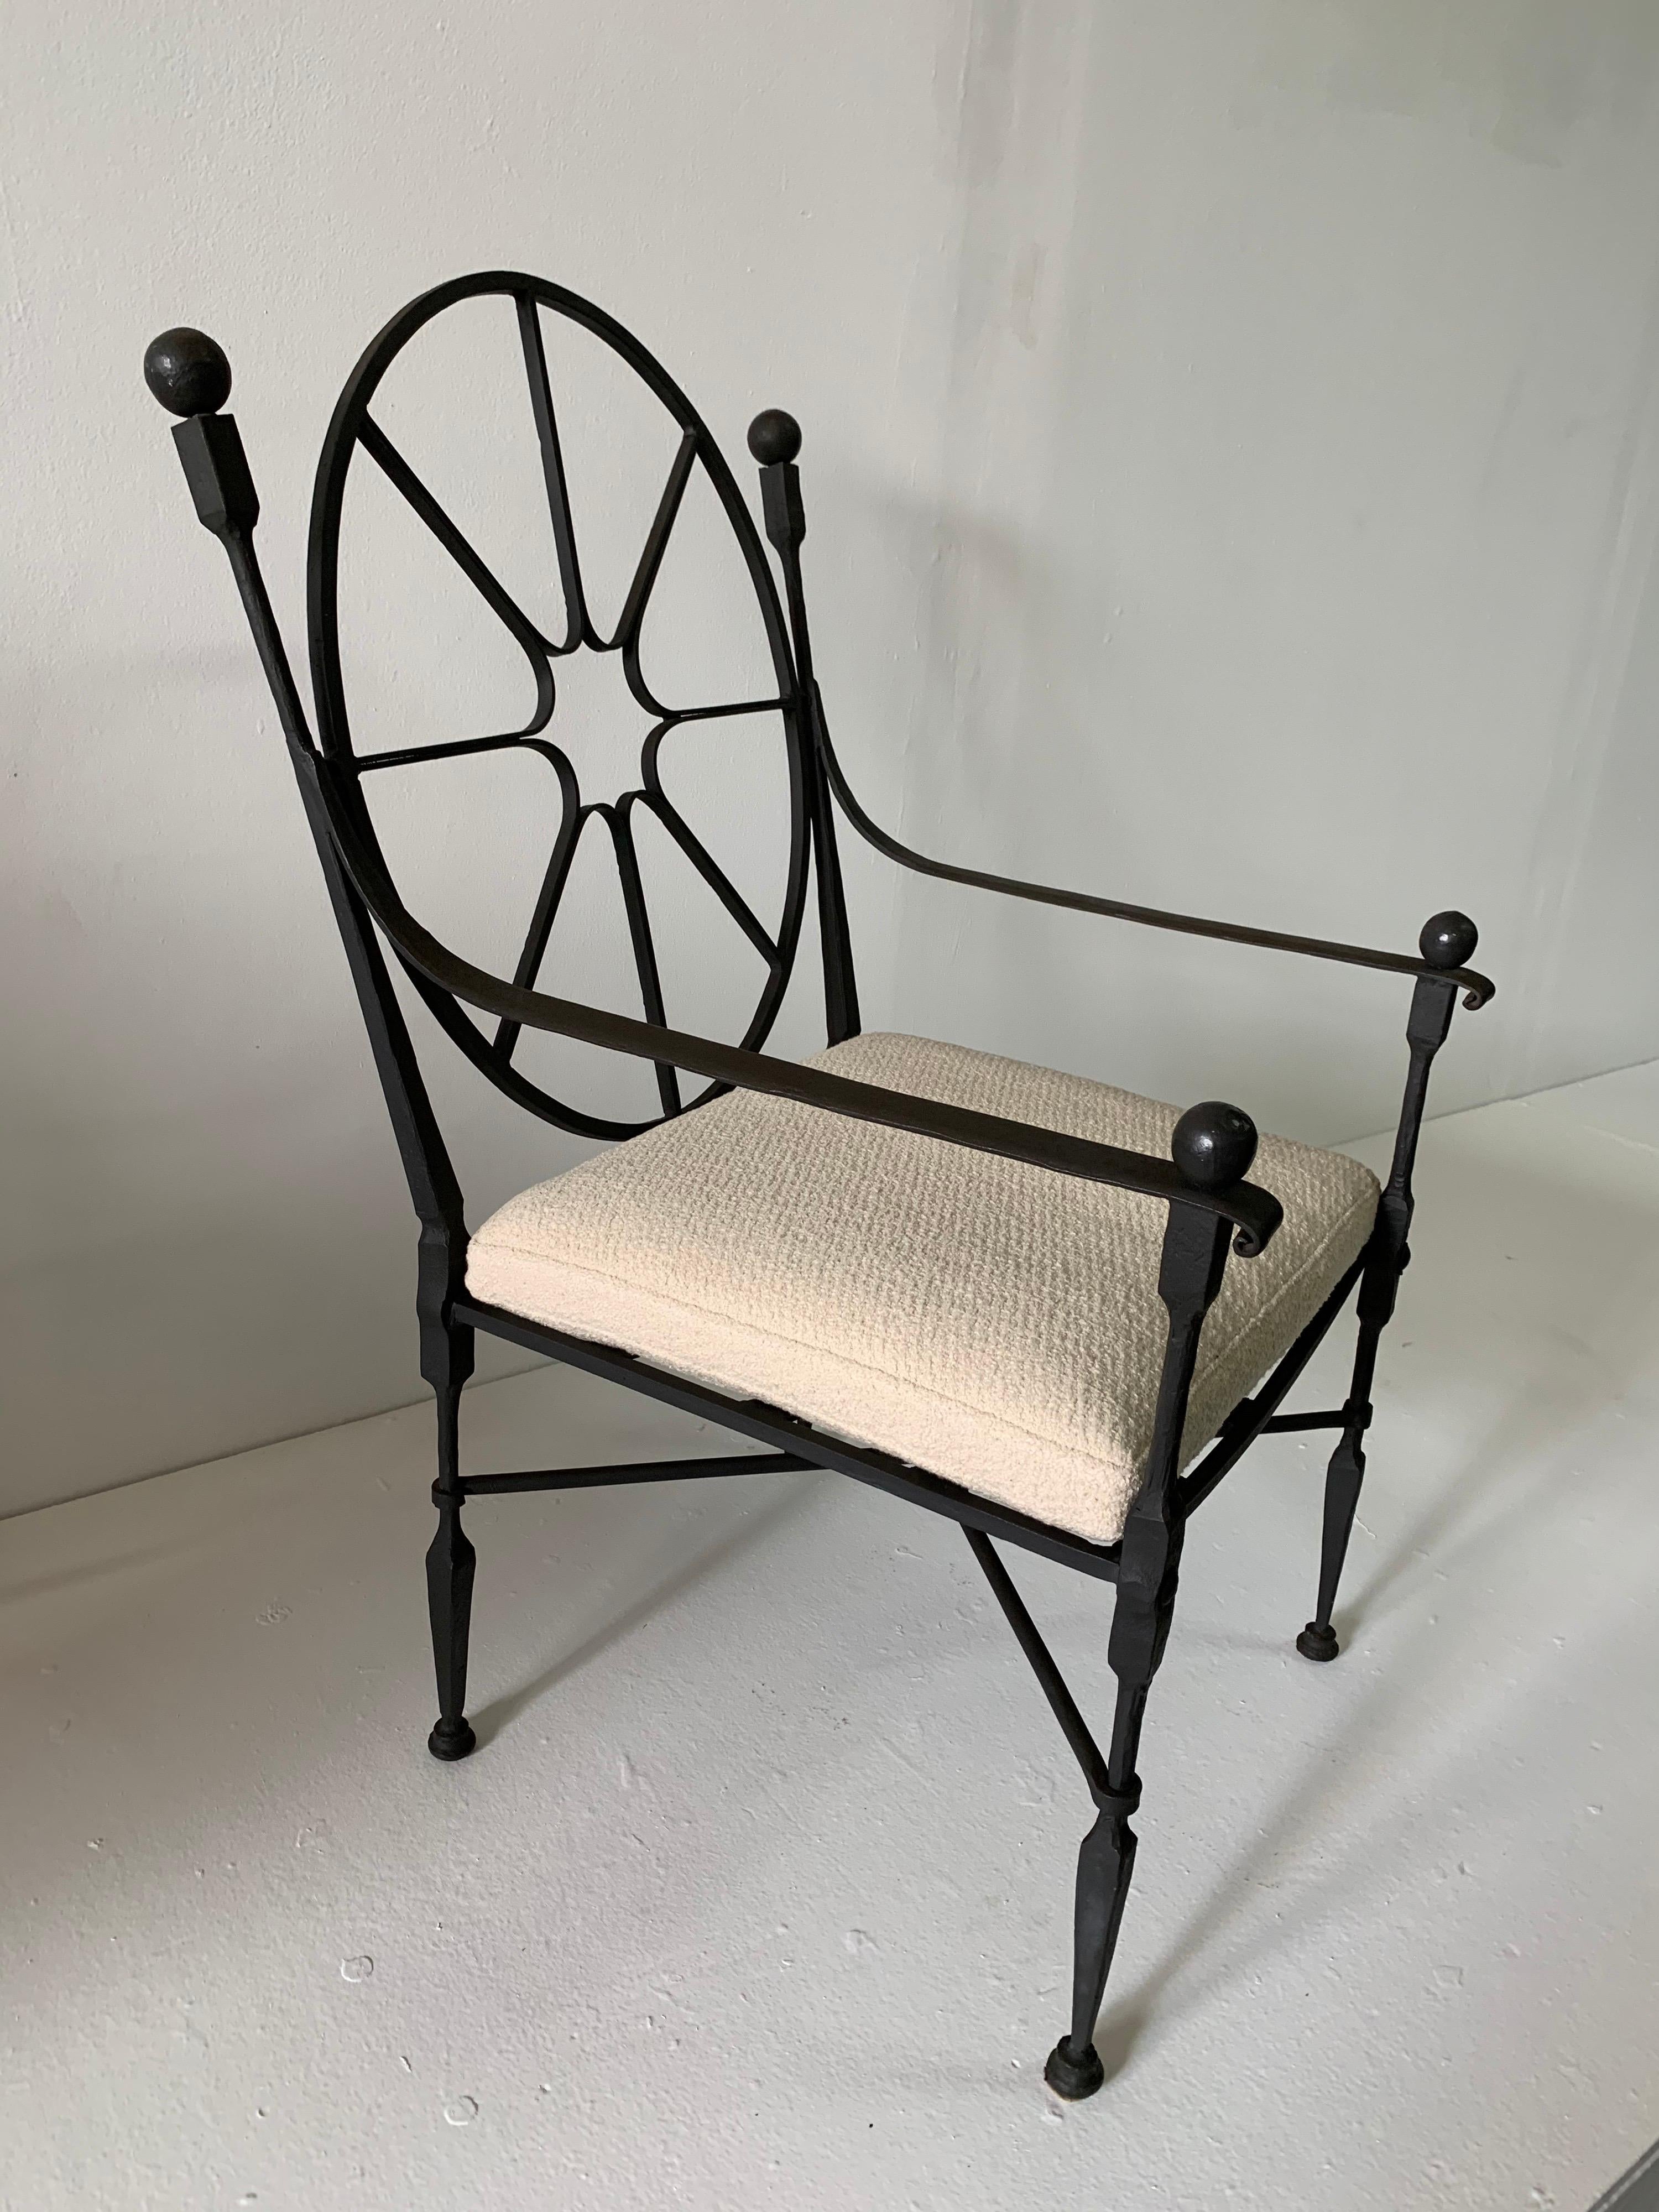 Exceptional craftsmanship in solid and heavy iron, boasts lovely details in the finials and sunburst backrest. Custom raw linen cushion.